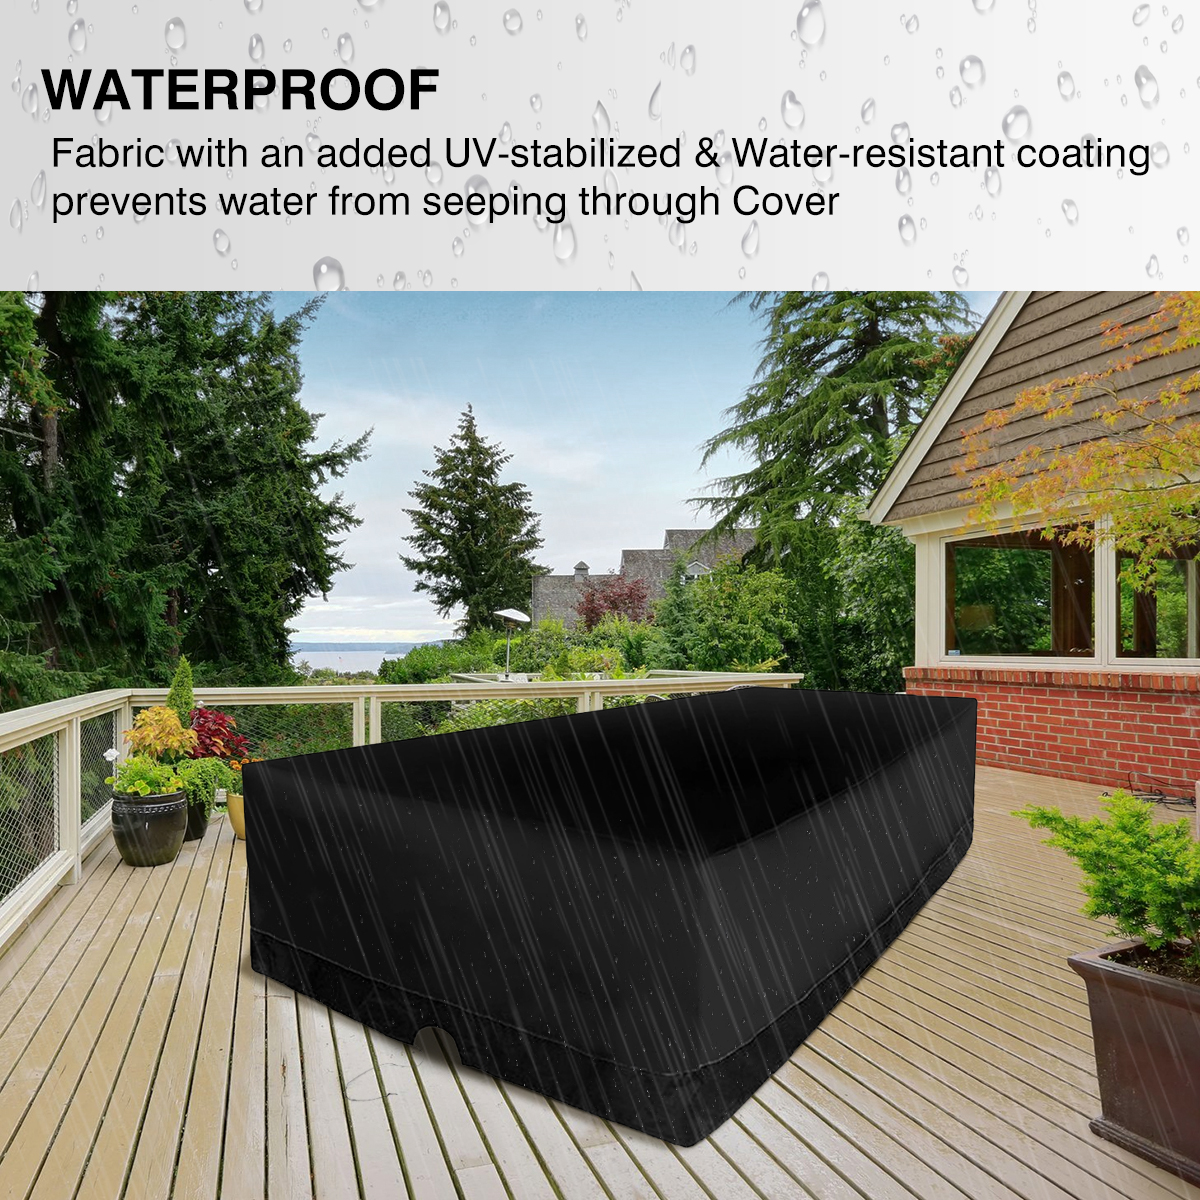 KING-DO-WAY-Outdoor-Patio-Furniture-Covers-Waterproof-Breathable-420D-Oxford-Fabric-with-4-Windproof-1540876-3